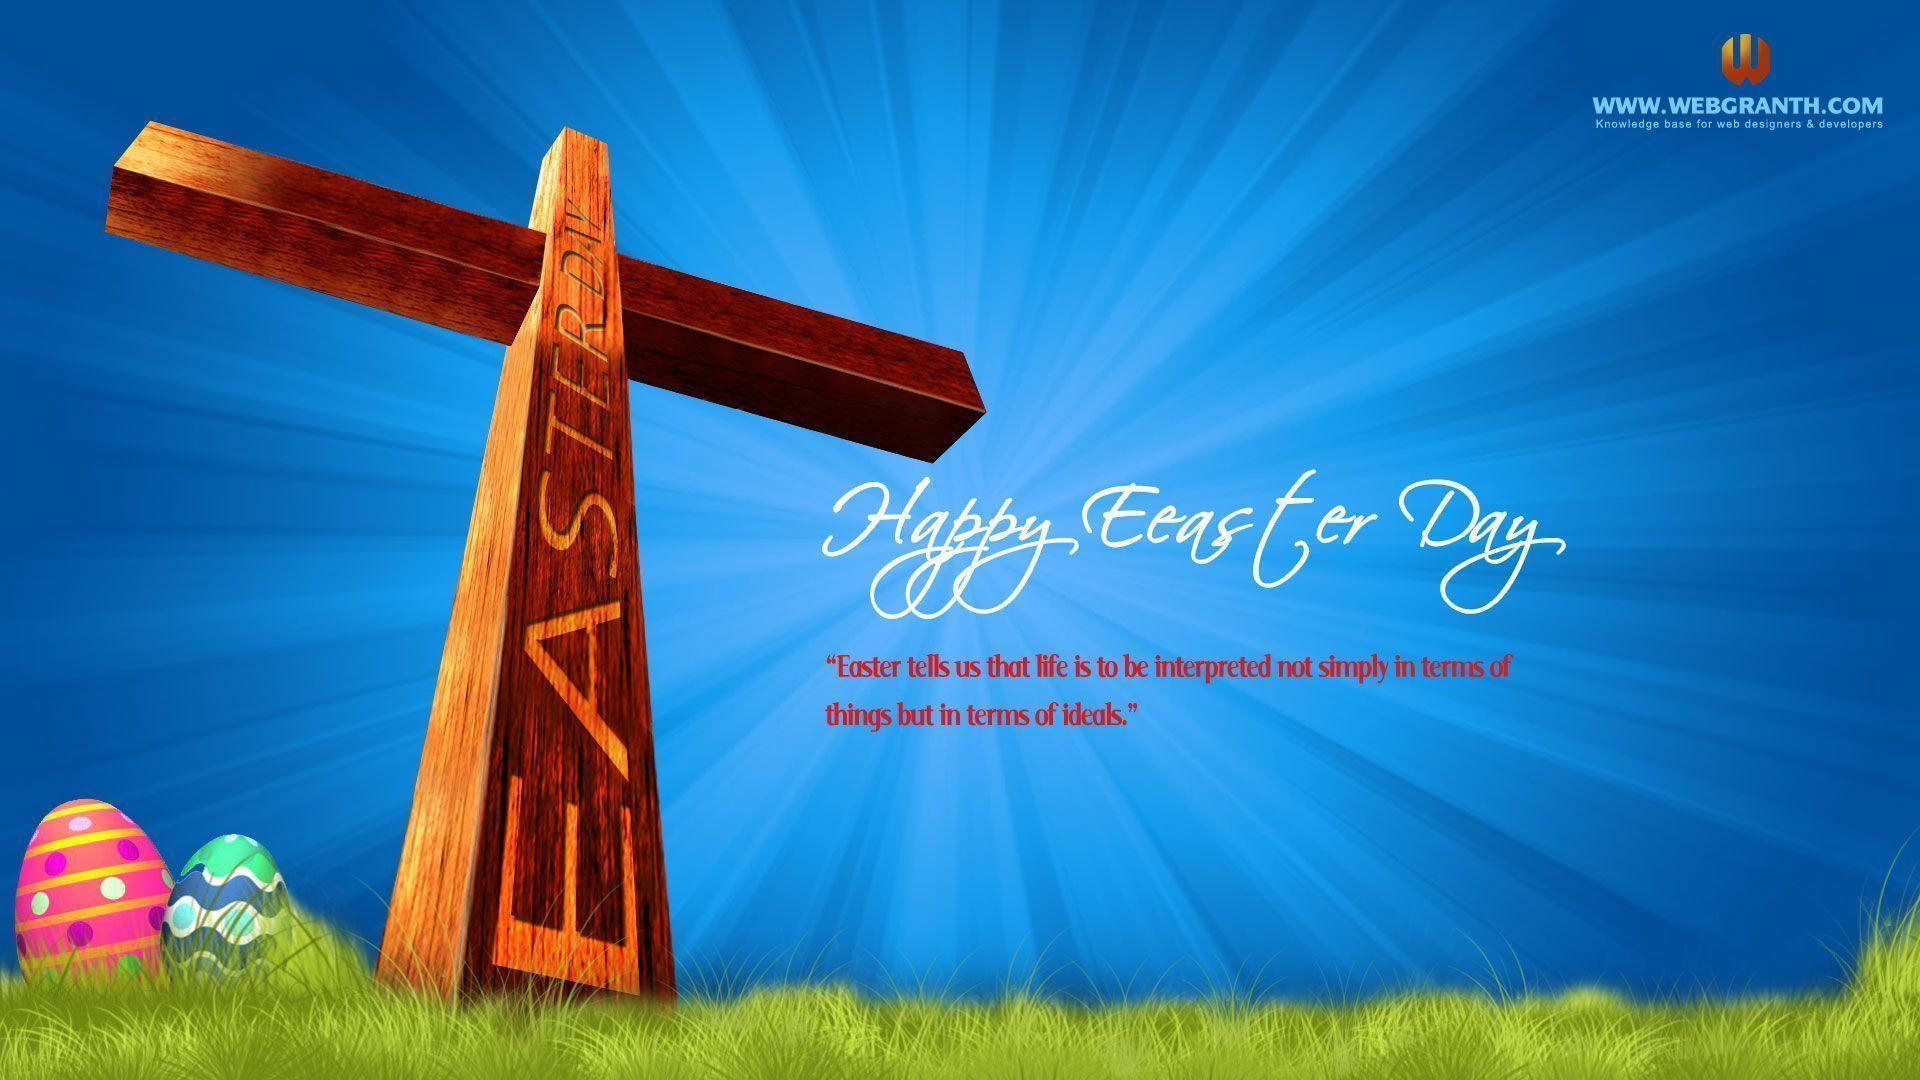 Free Christian Easter Wallpapers - Wallpaper Cave